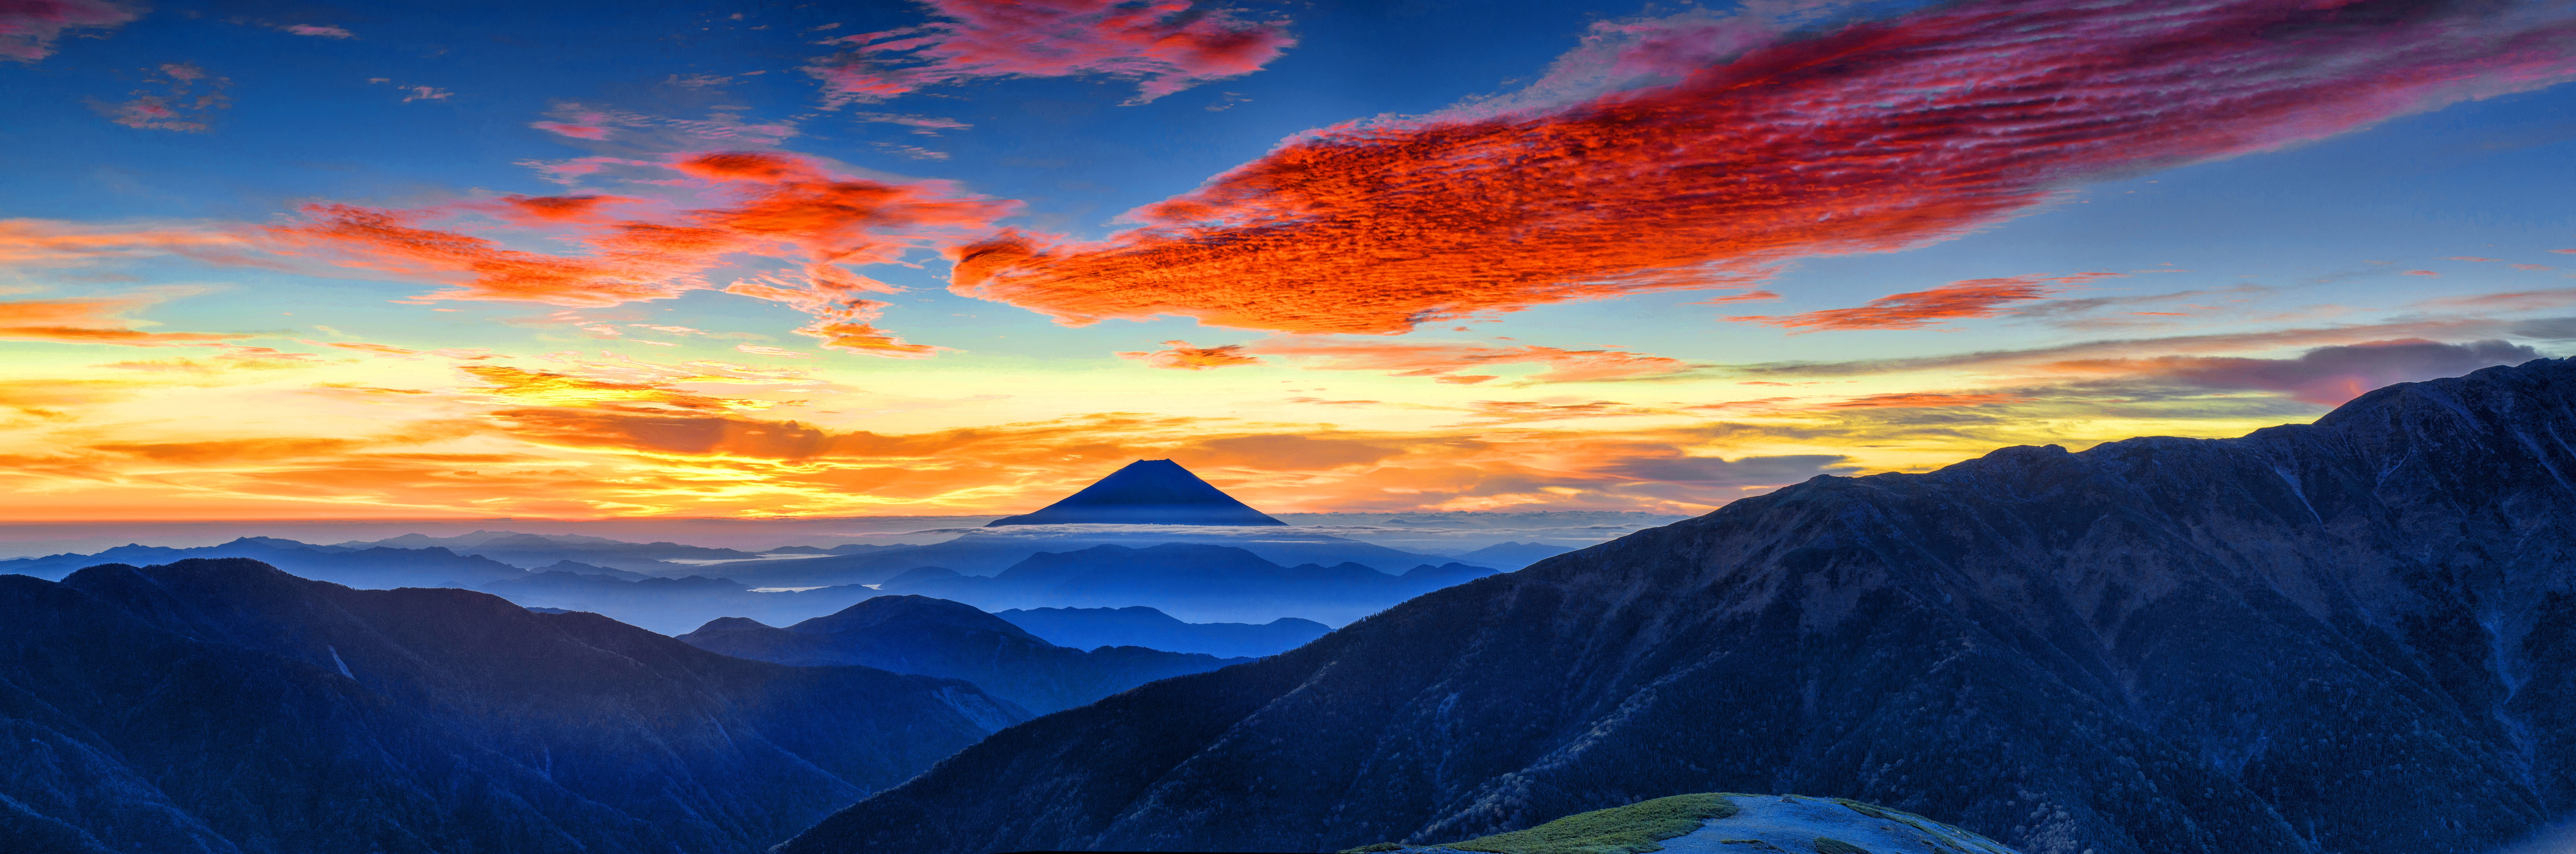 Blue mountains with orange clouds and blue sky landscape  